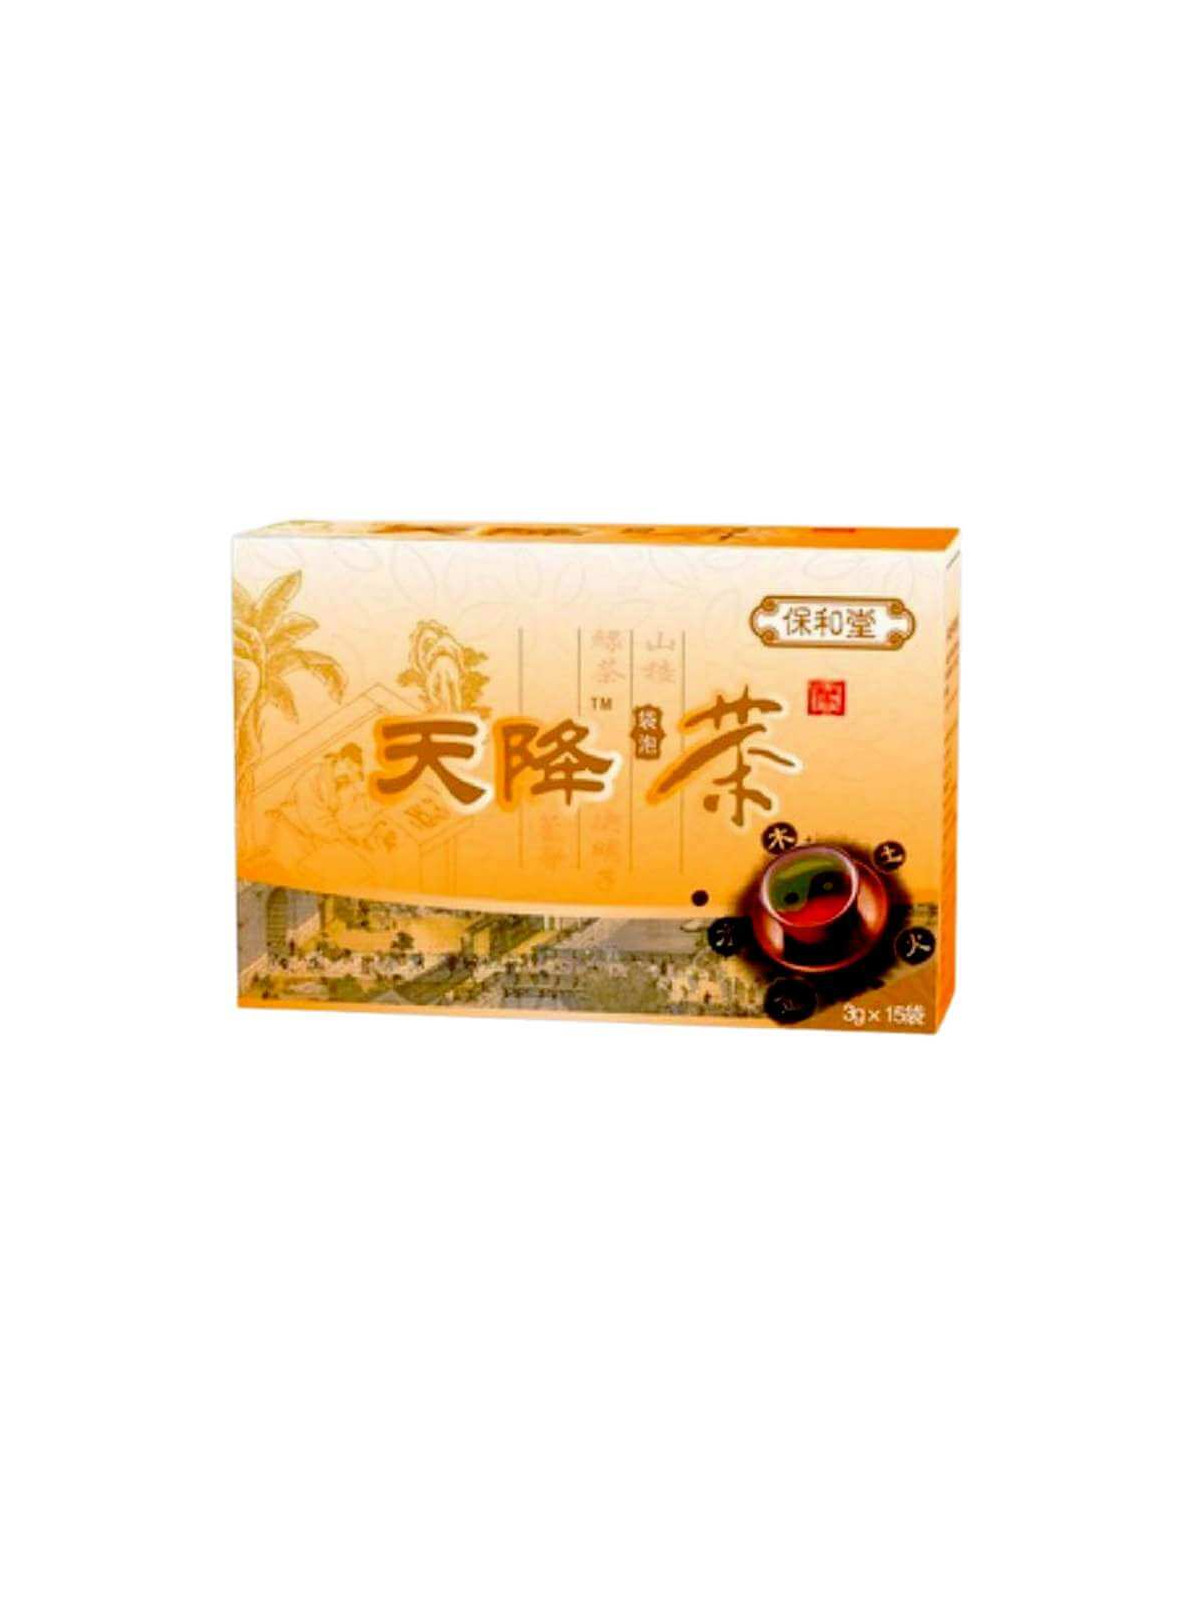 Catherine Herbal Slimming Weight Loss Tea Chrysanthemum and Vanilla Flavour  [32 Tea Bags] from Thailand